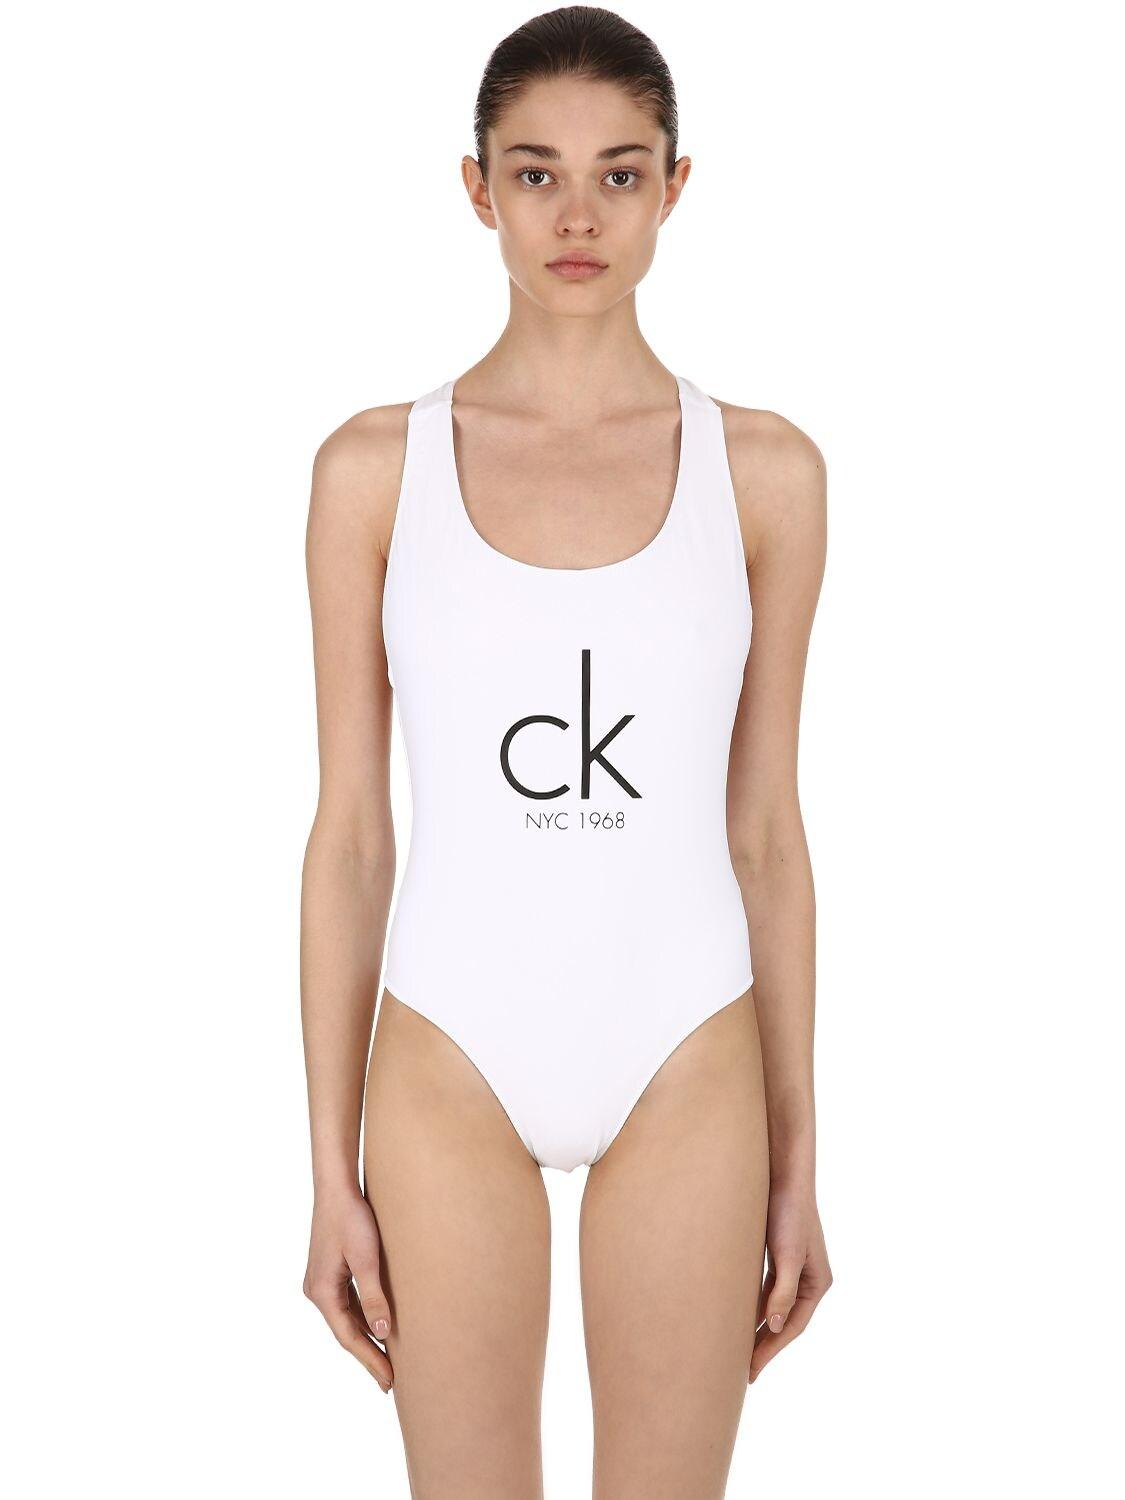 Calvin Klein Cheeky Racerback One Piece Swimsuit in White